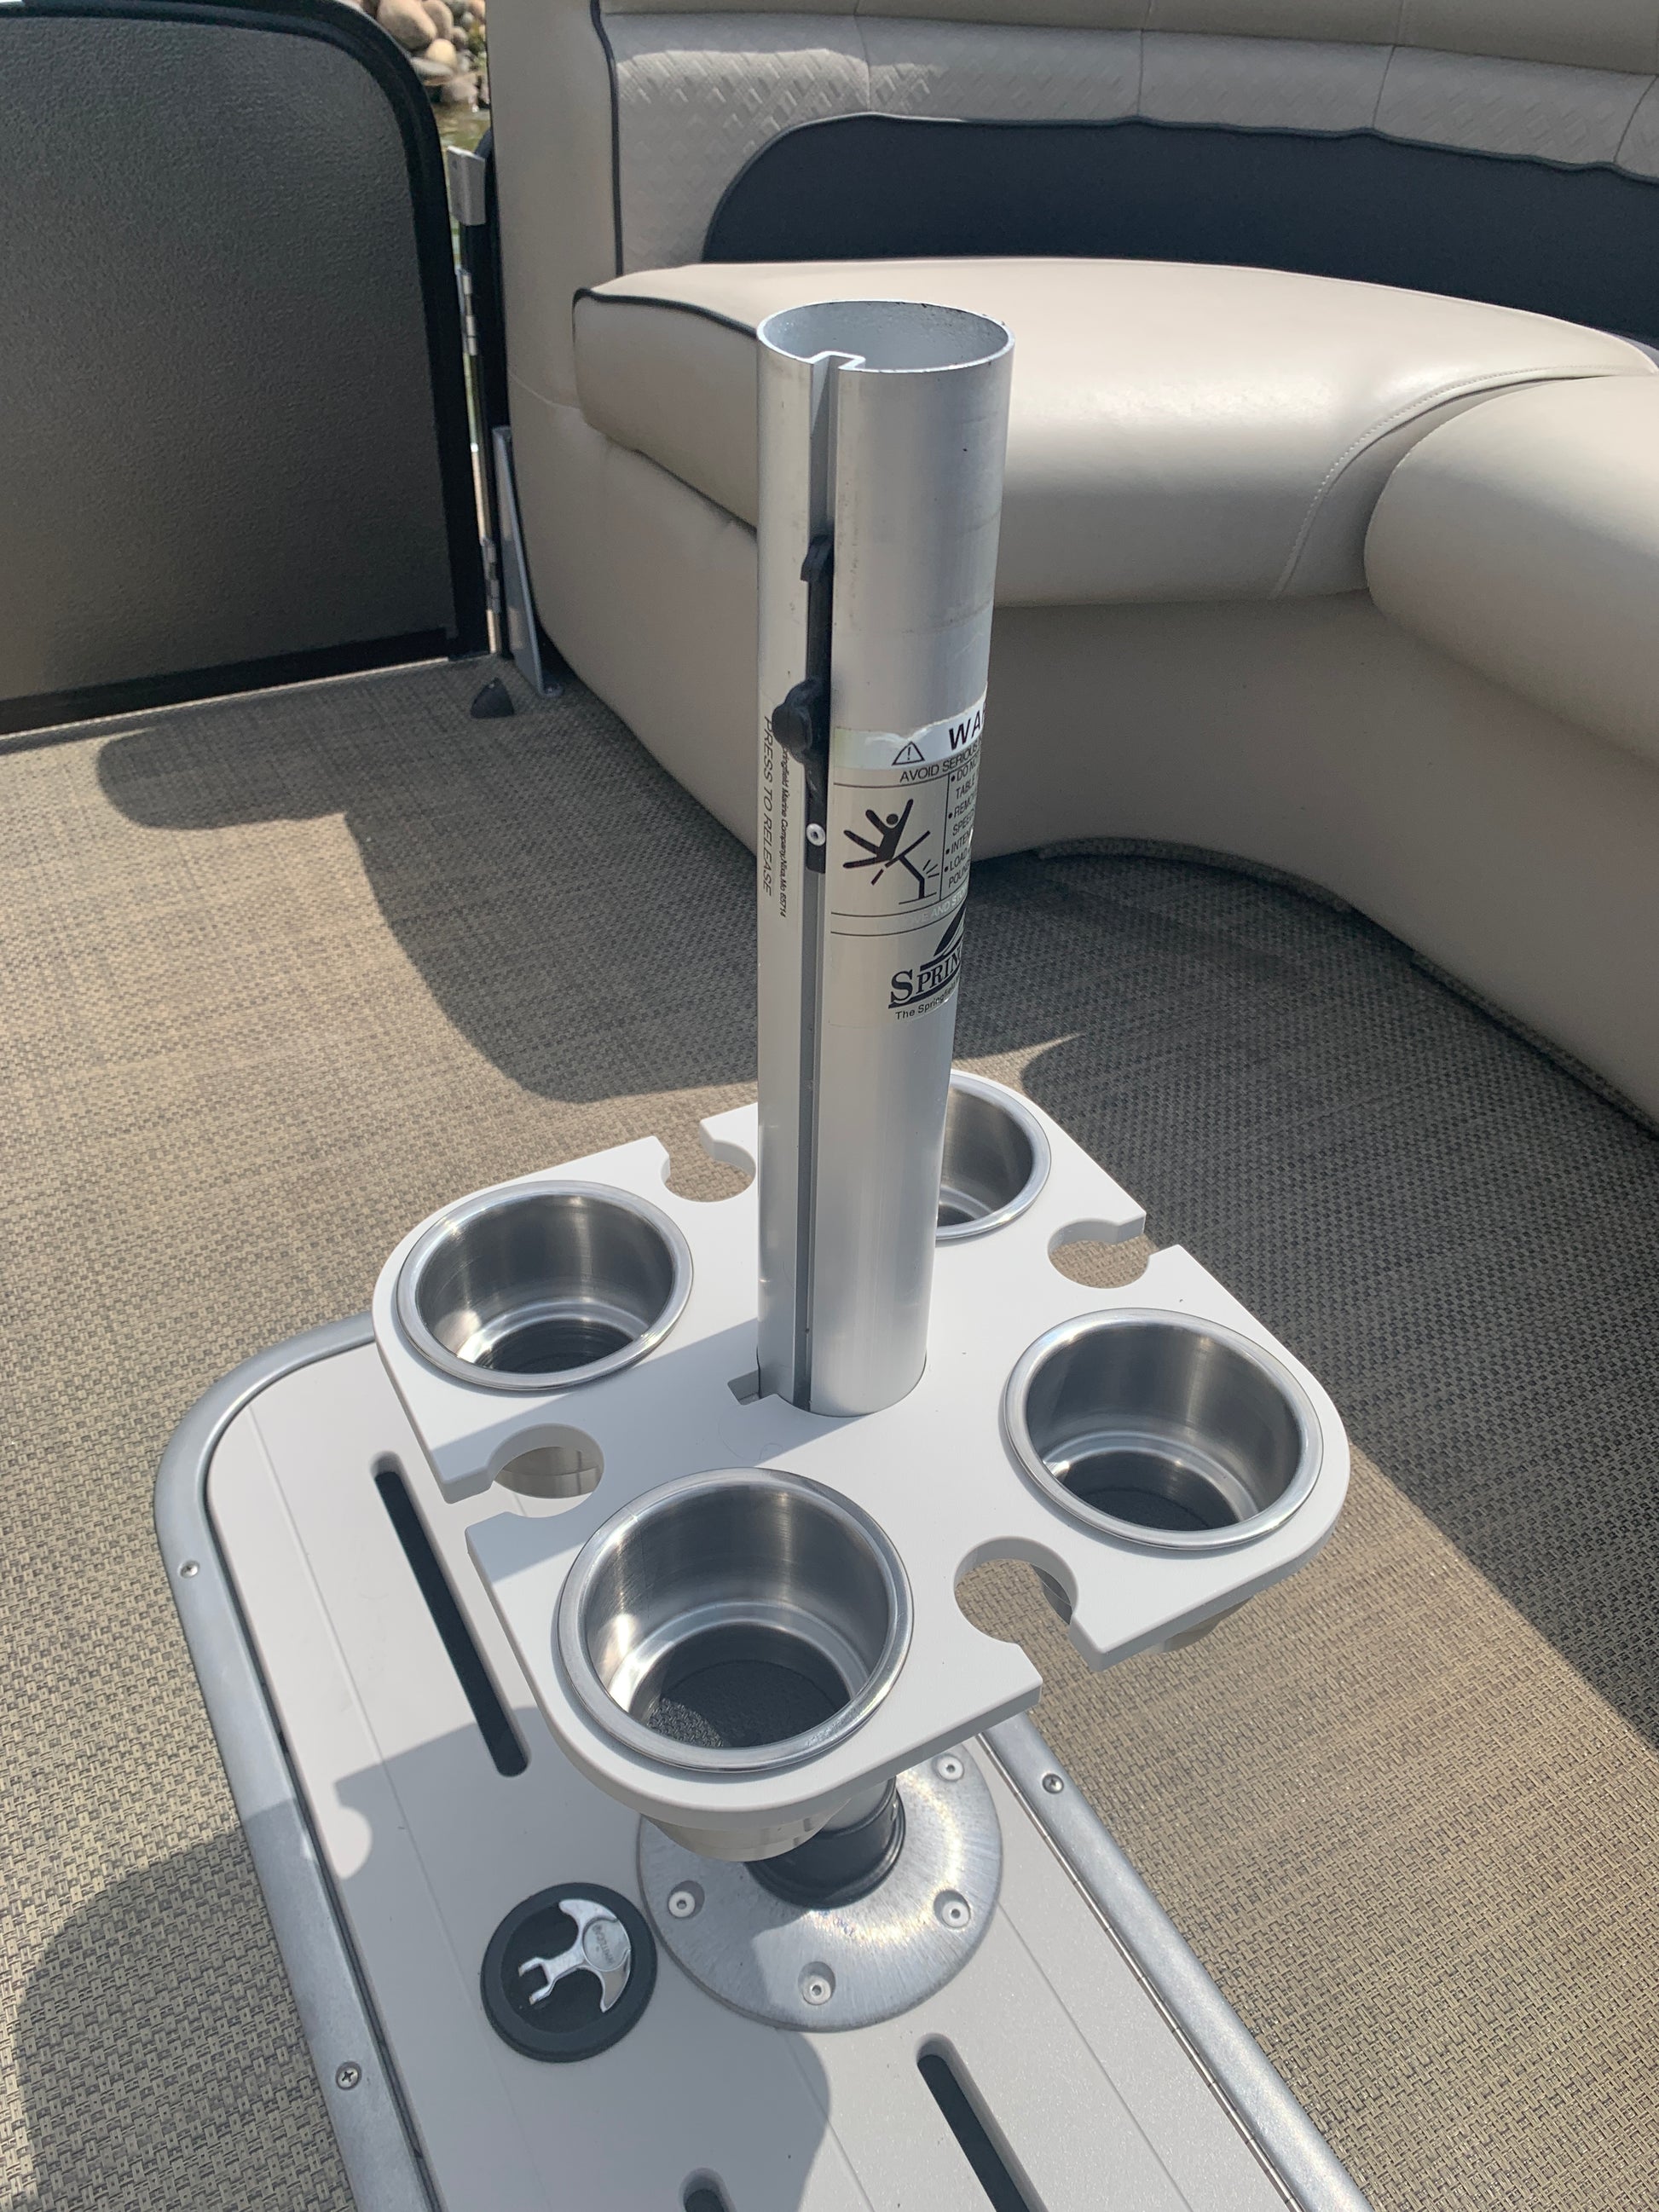 4 Pcs Boat Cup Holder, Cup and Wine Glass Holder